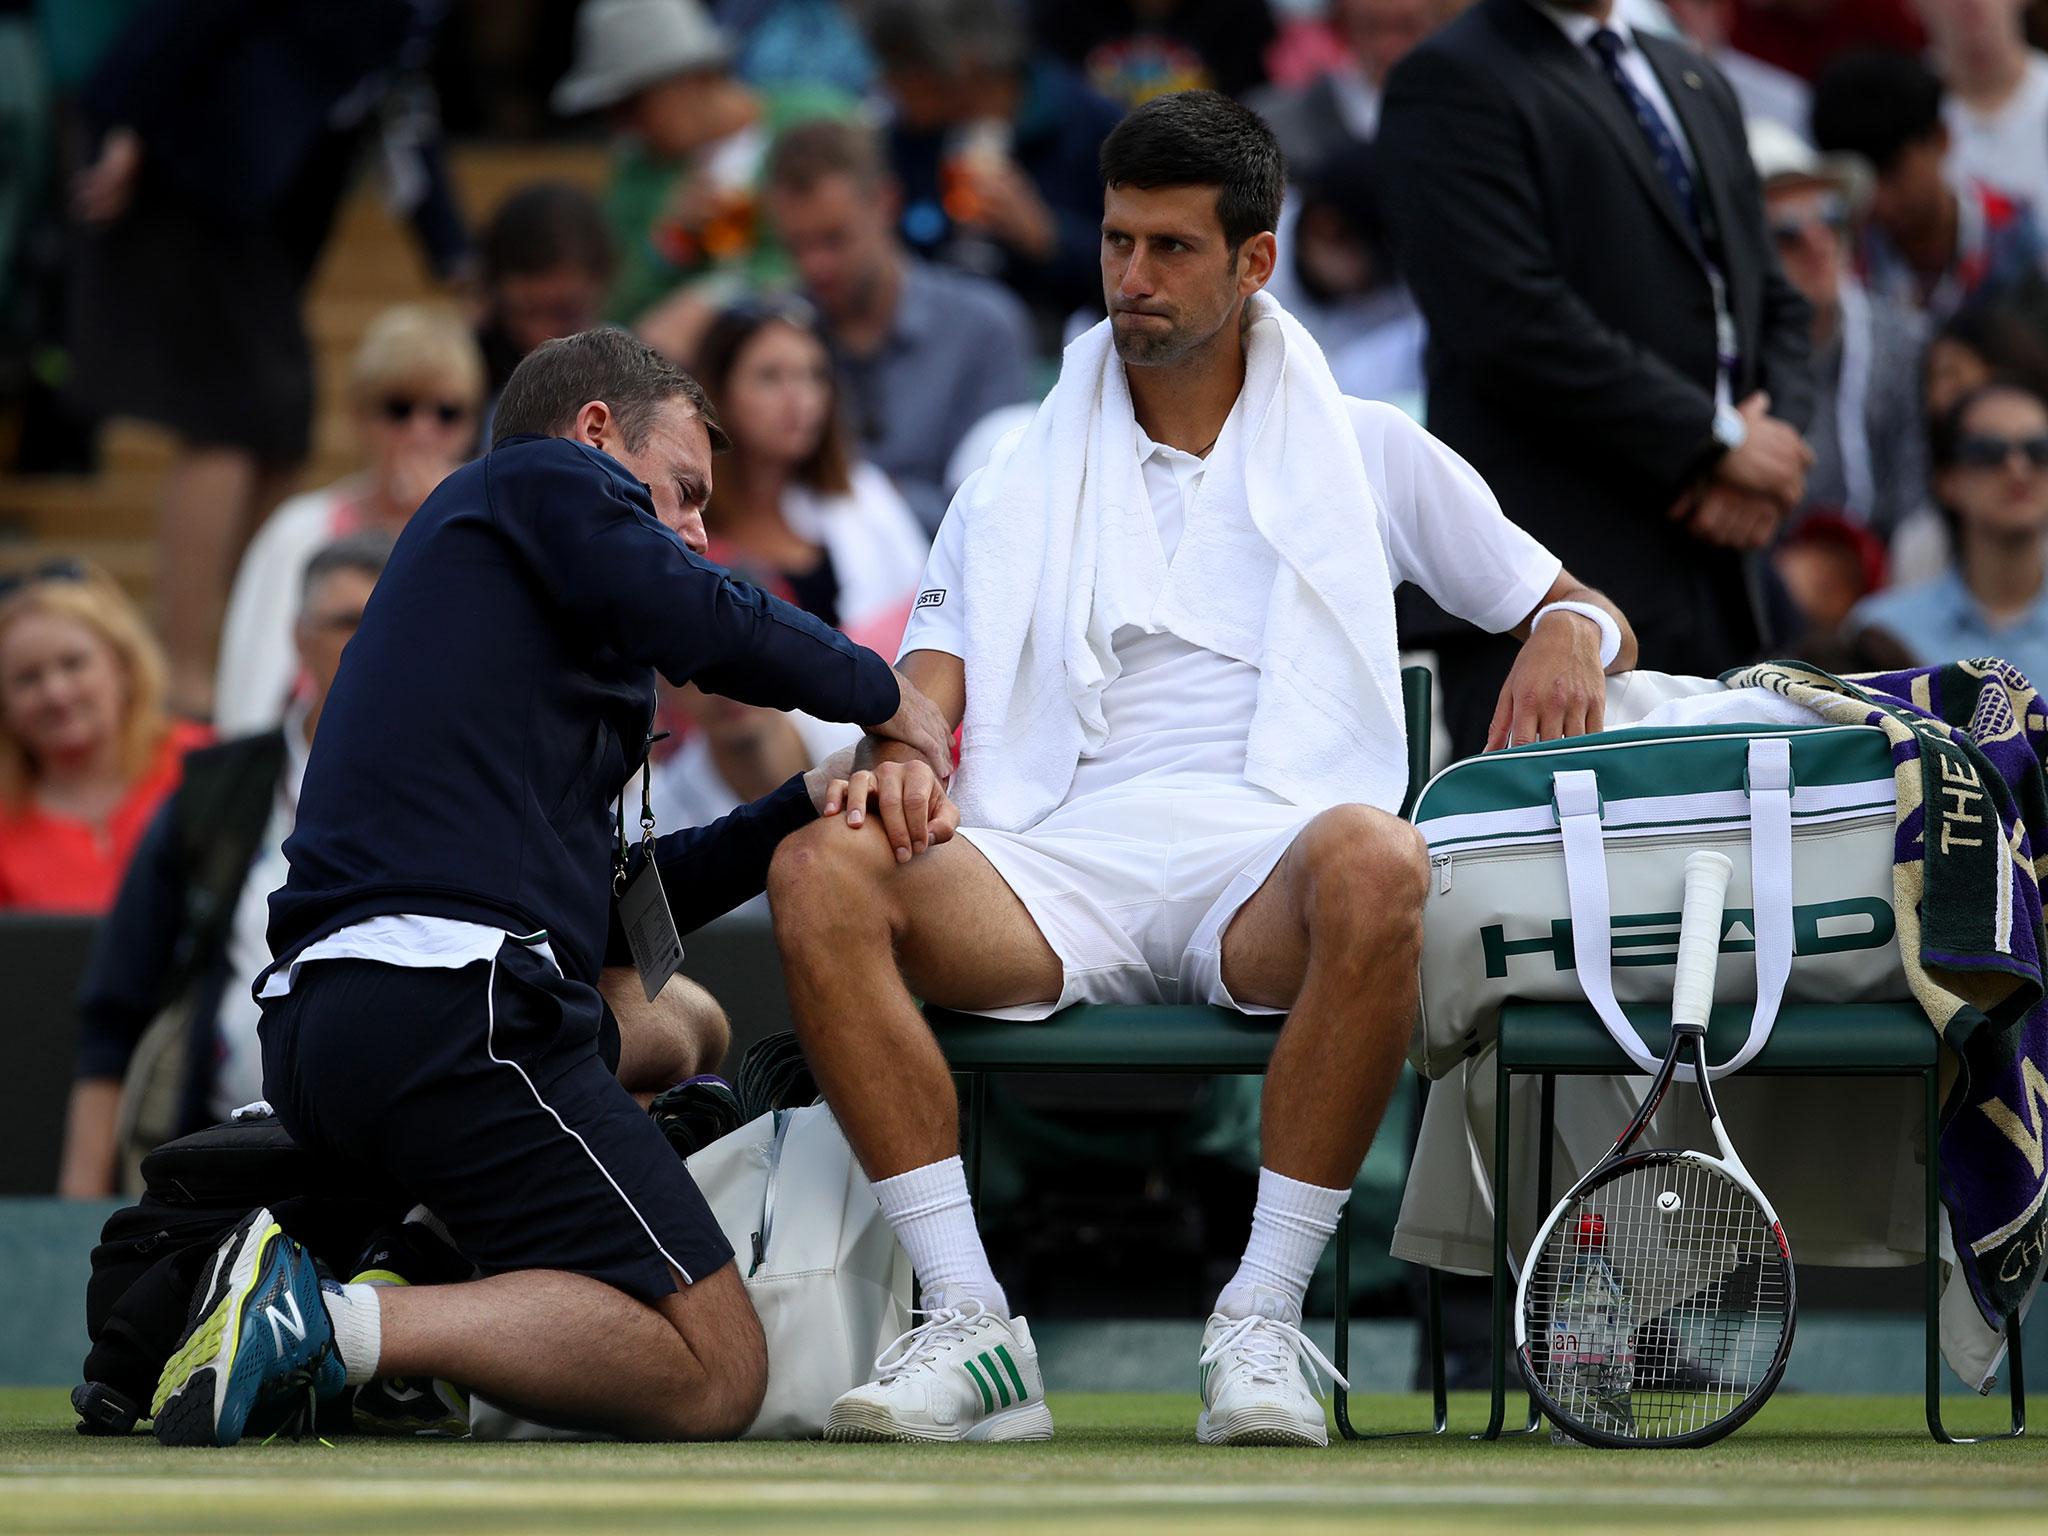 Novak Djokovic is set to make his first appearance since July